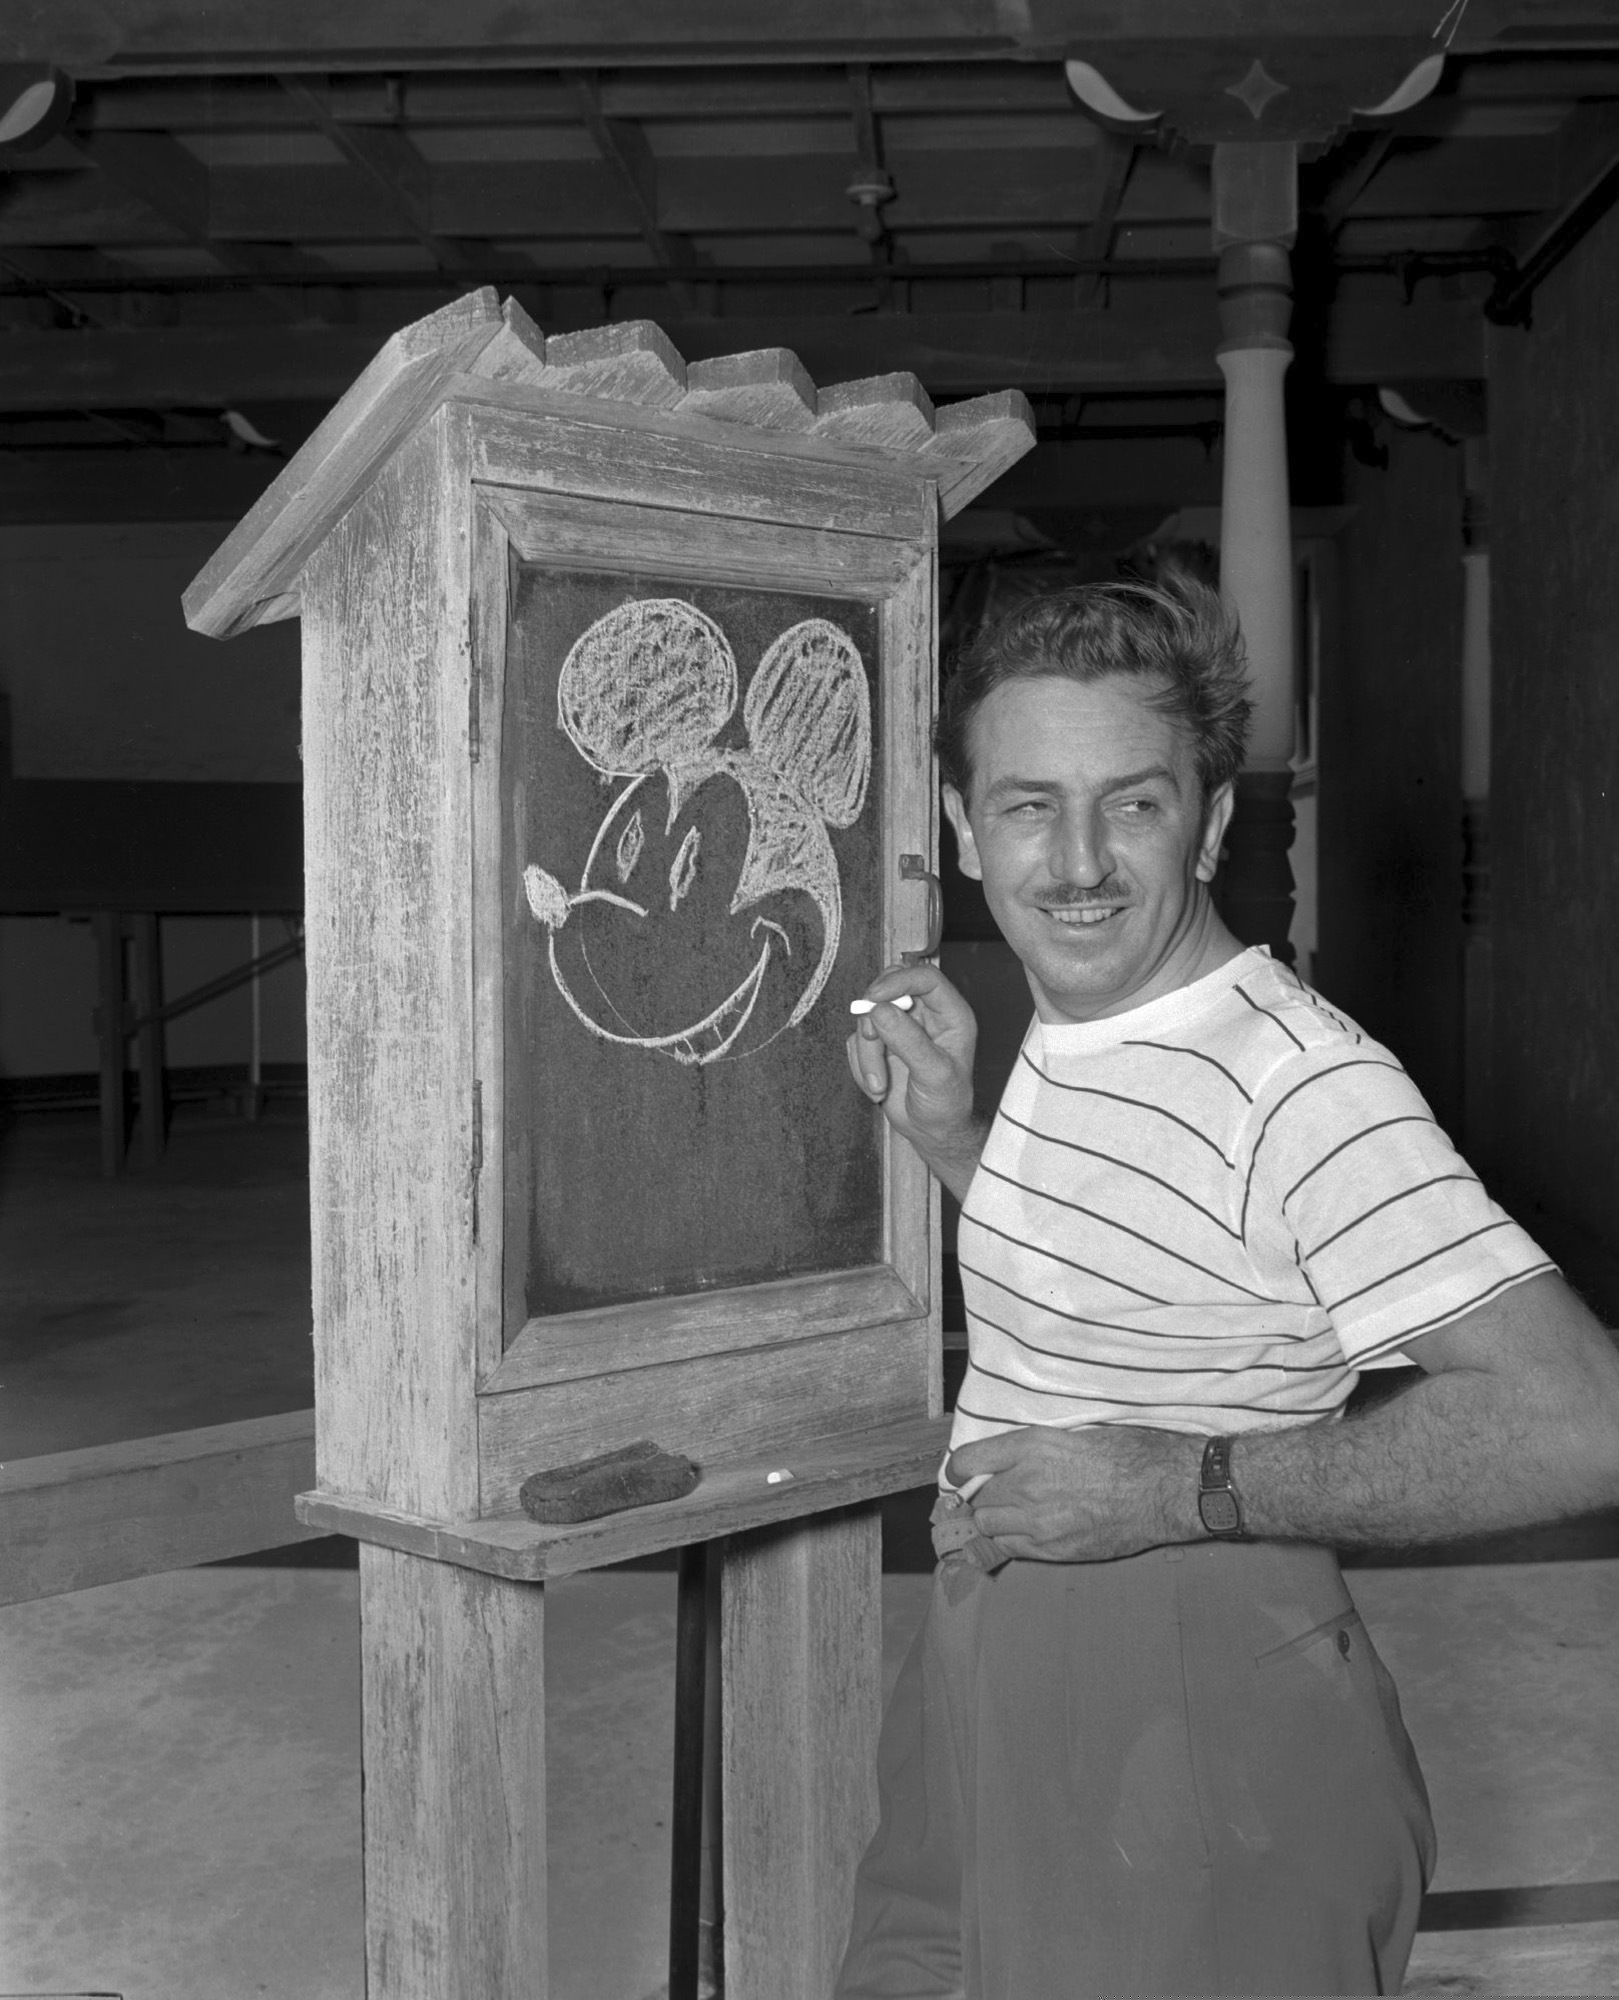 How the Saints general manager, as a lost little boy, was saved by Walt Disney